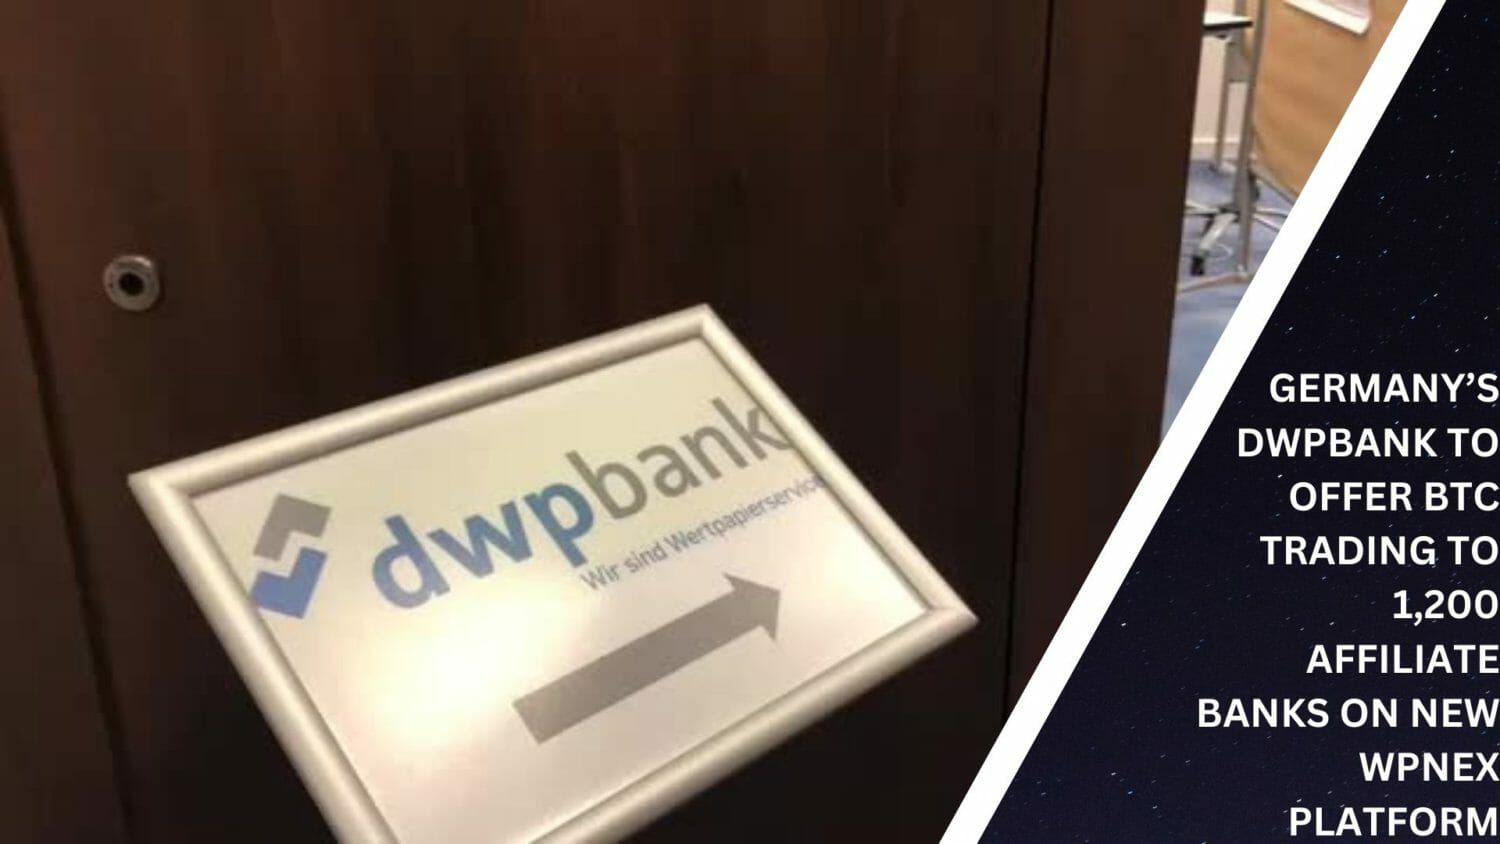 Germany’s Dwpbank To Offer Btc Trading To 1,200 Affiliate Banks On New Wpnex Platform